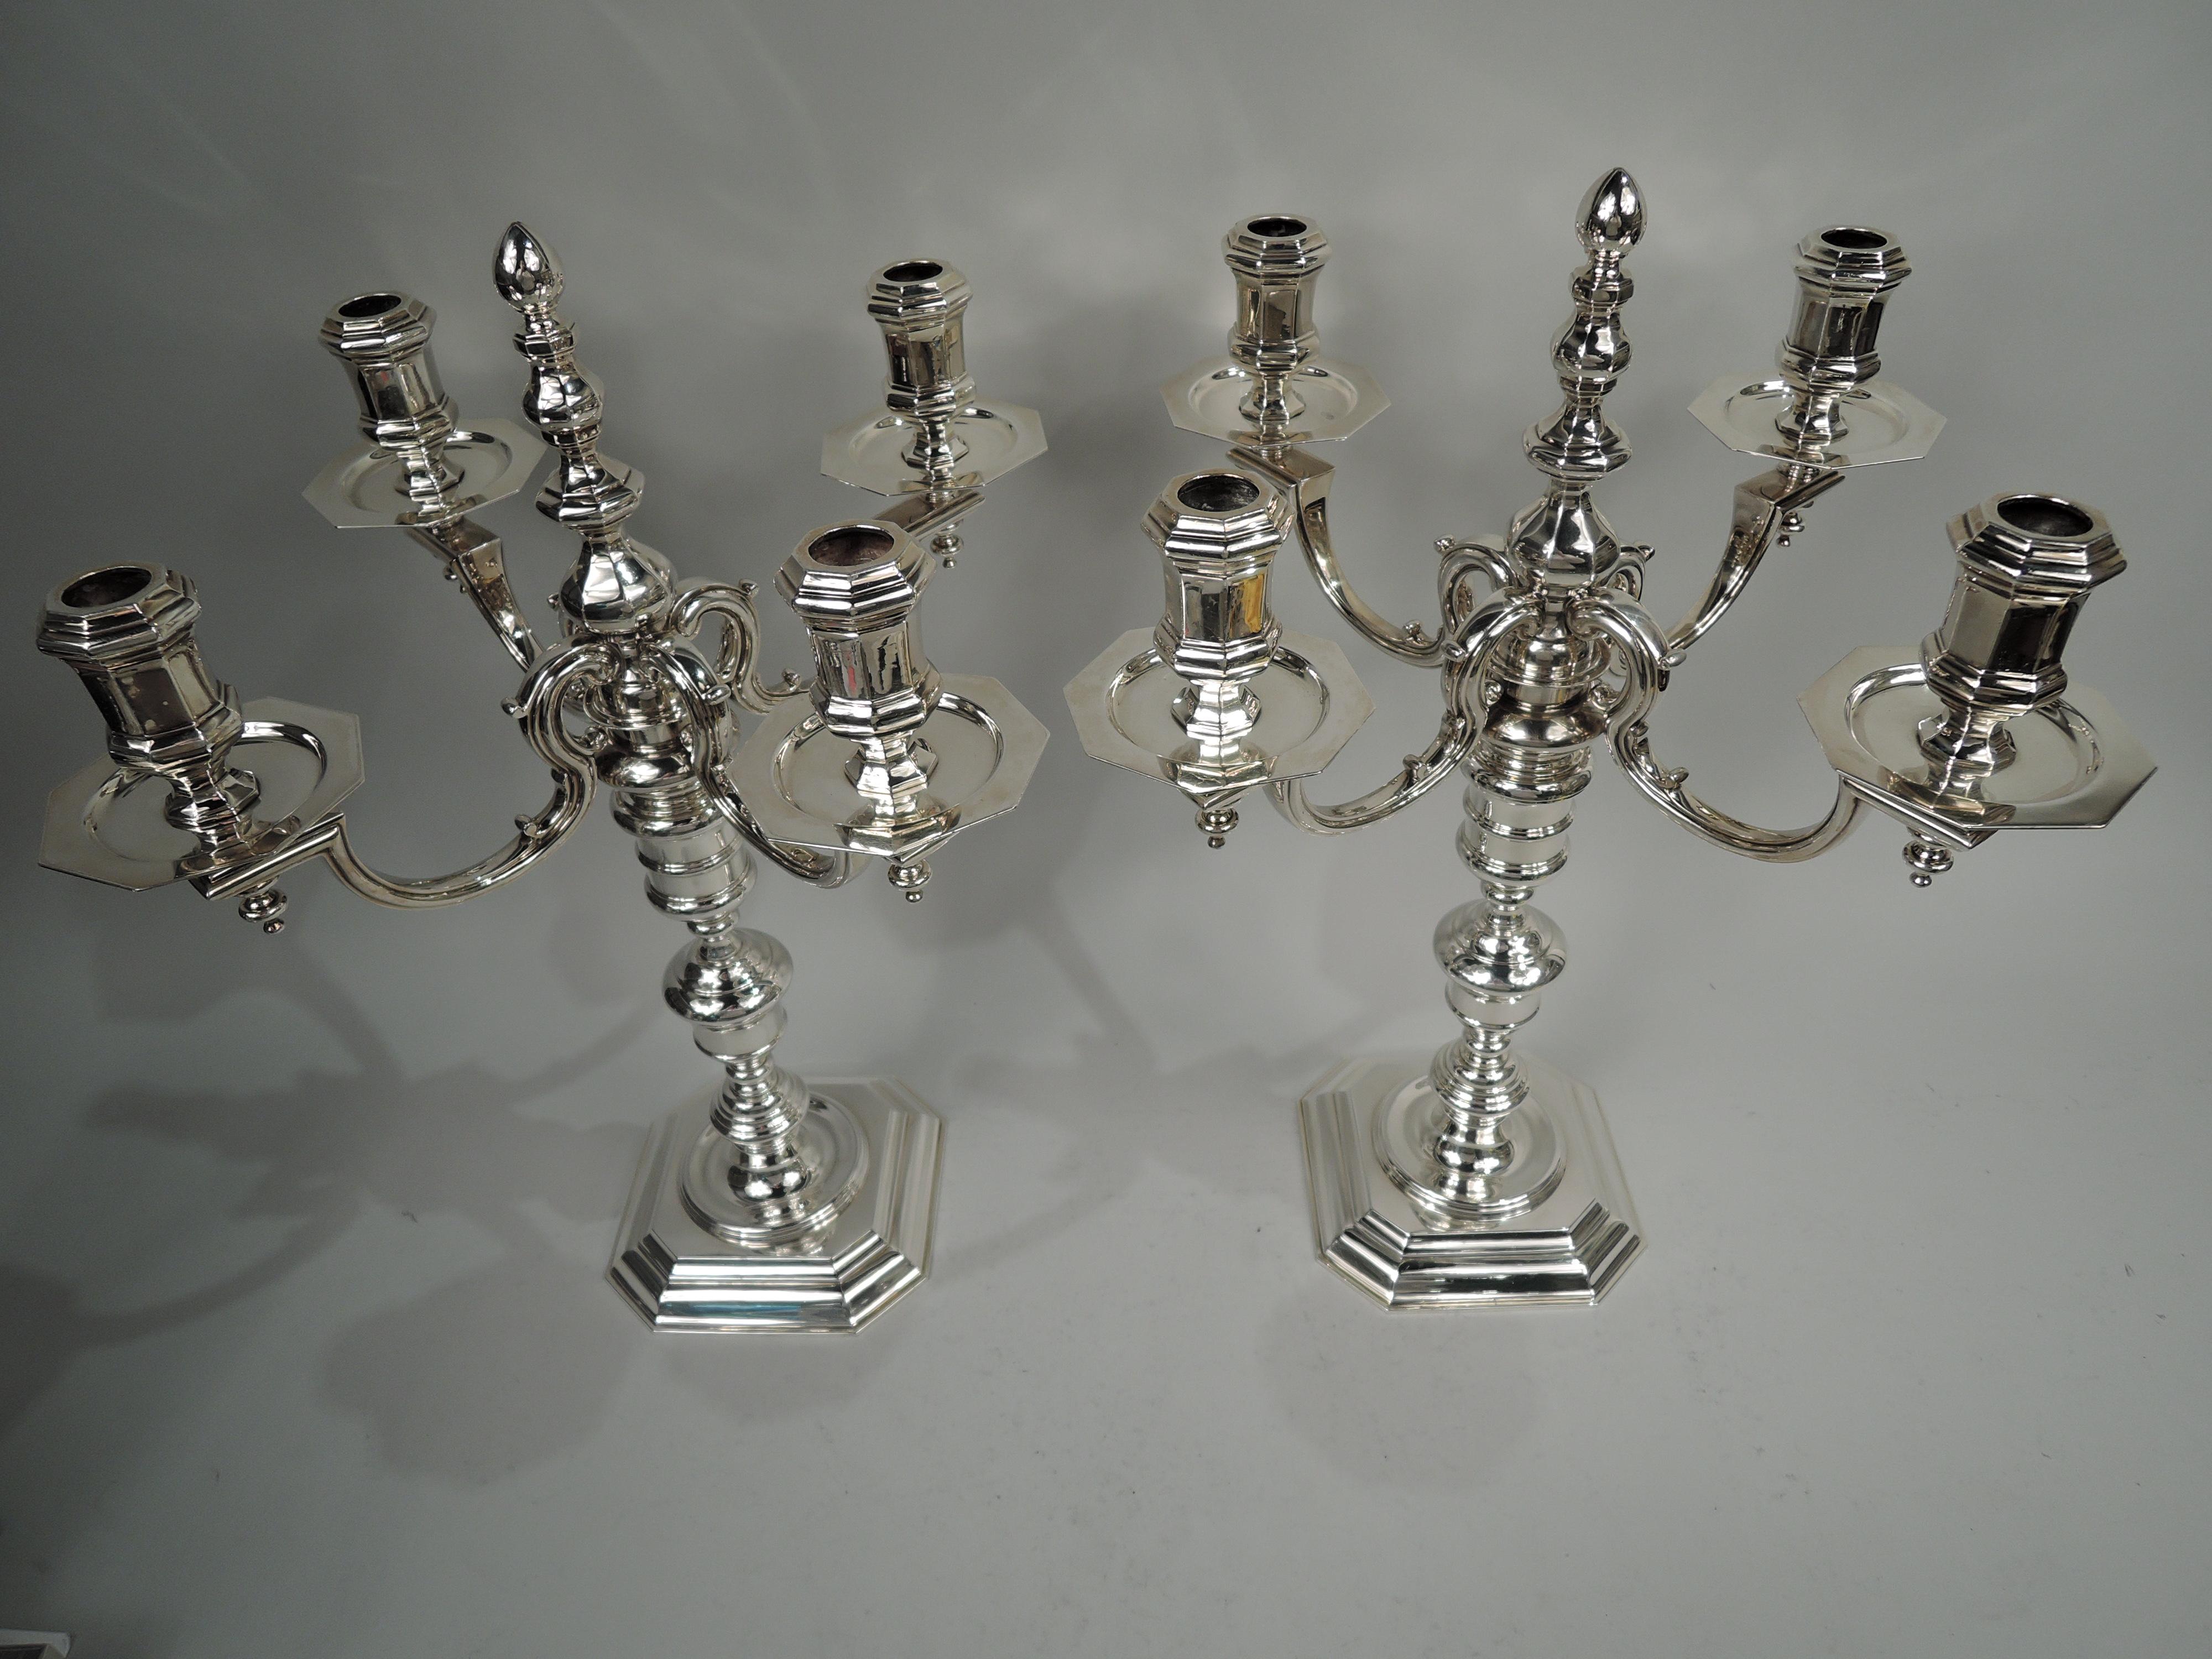 Pair of traditional Georgian sterling silver 4-light candelabra. Made by Asprey in London, 1992-3. Each: Four capped and curvilinear arms each terminating in single faceted socket with same wax pan and baluster pendant. Arms mounted to tall and